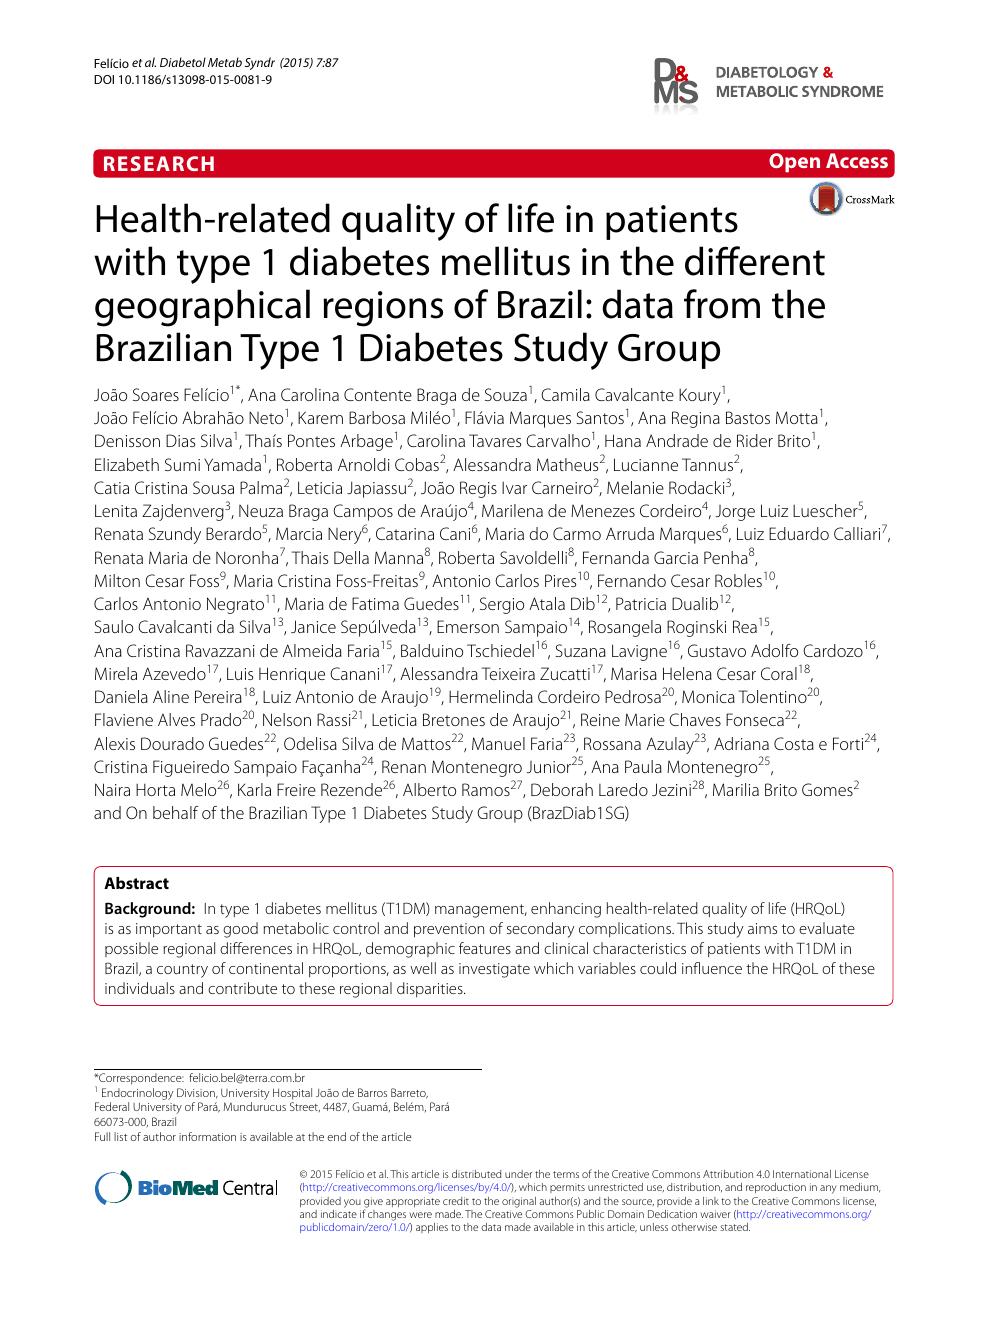 Health Related Quality Of Life In Patients With Type 1 Diabetes Mellitus In The Different Geographical Regions Of Brazil Data From The Brazilian Type 1 Diabetes Study Group Topic Of Research Paper